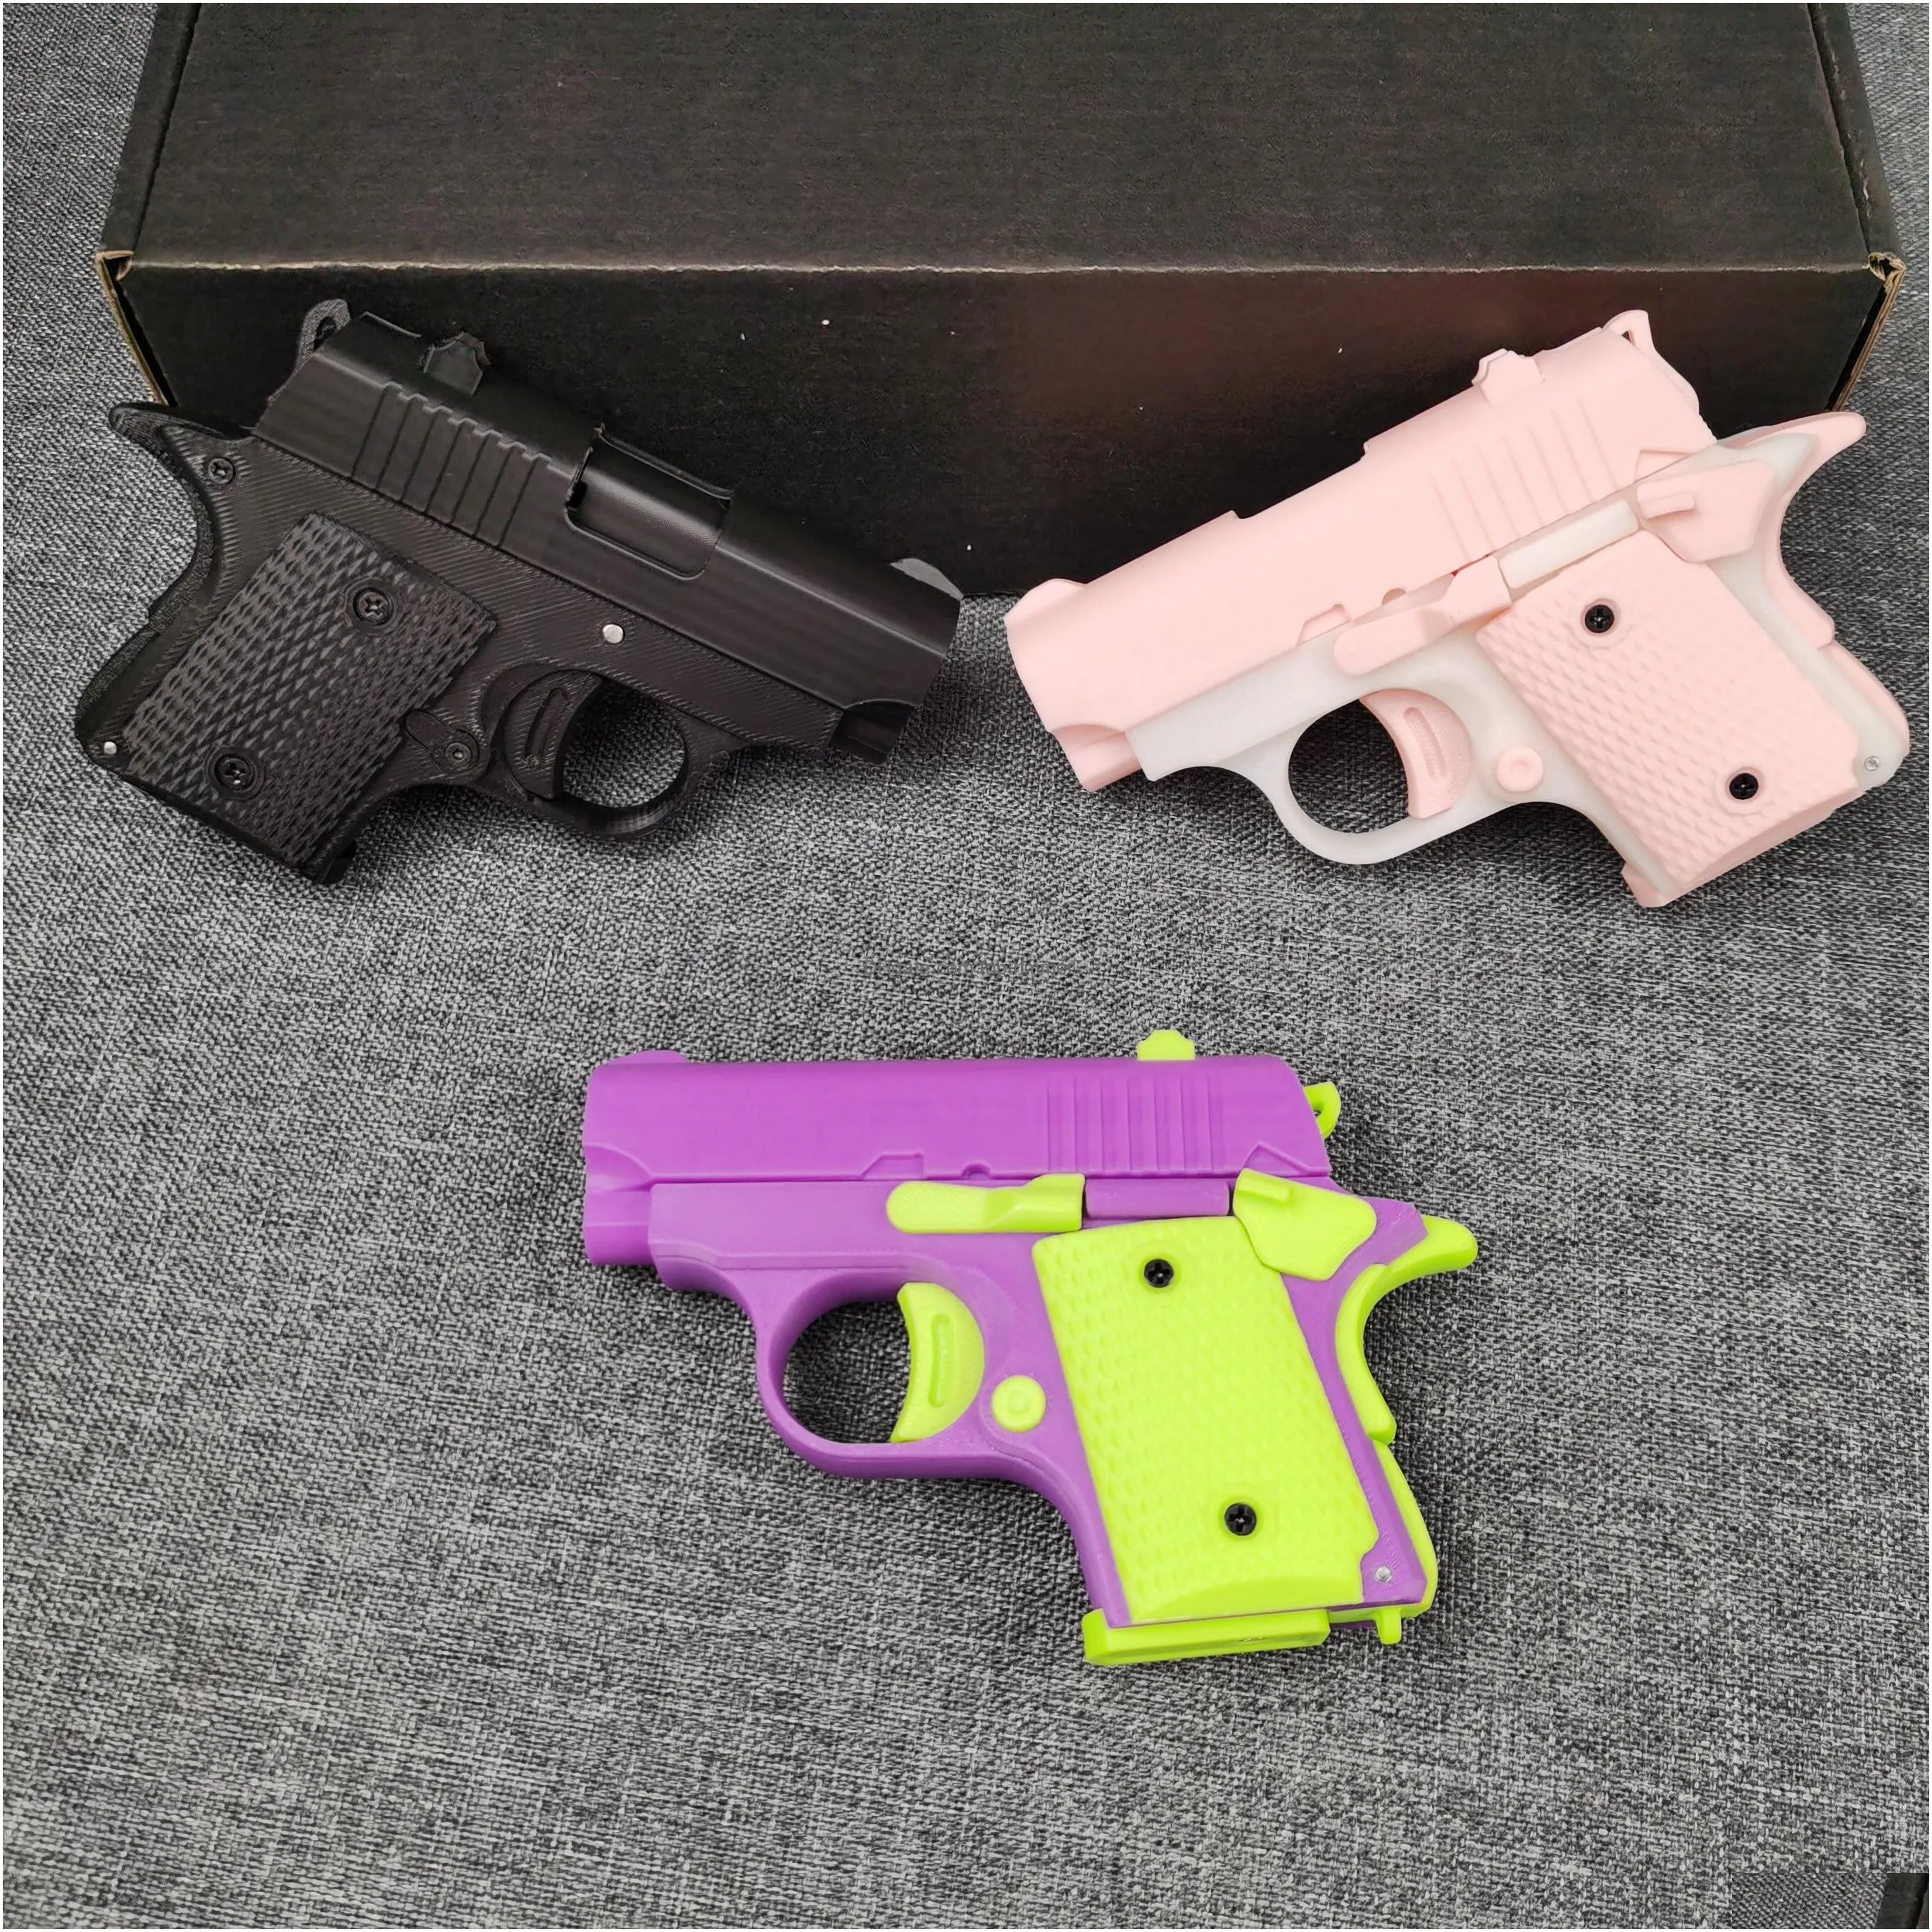 baby 1911 edc toy gun for kids adults boys birthday gifts